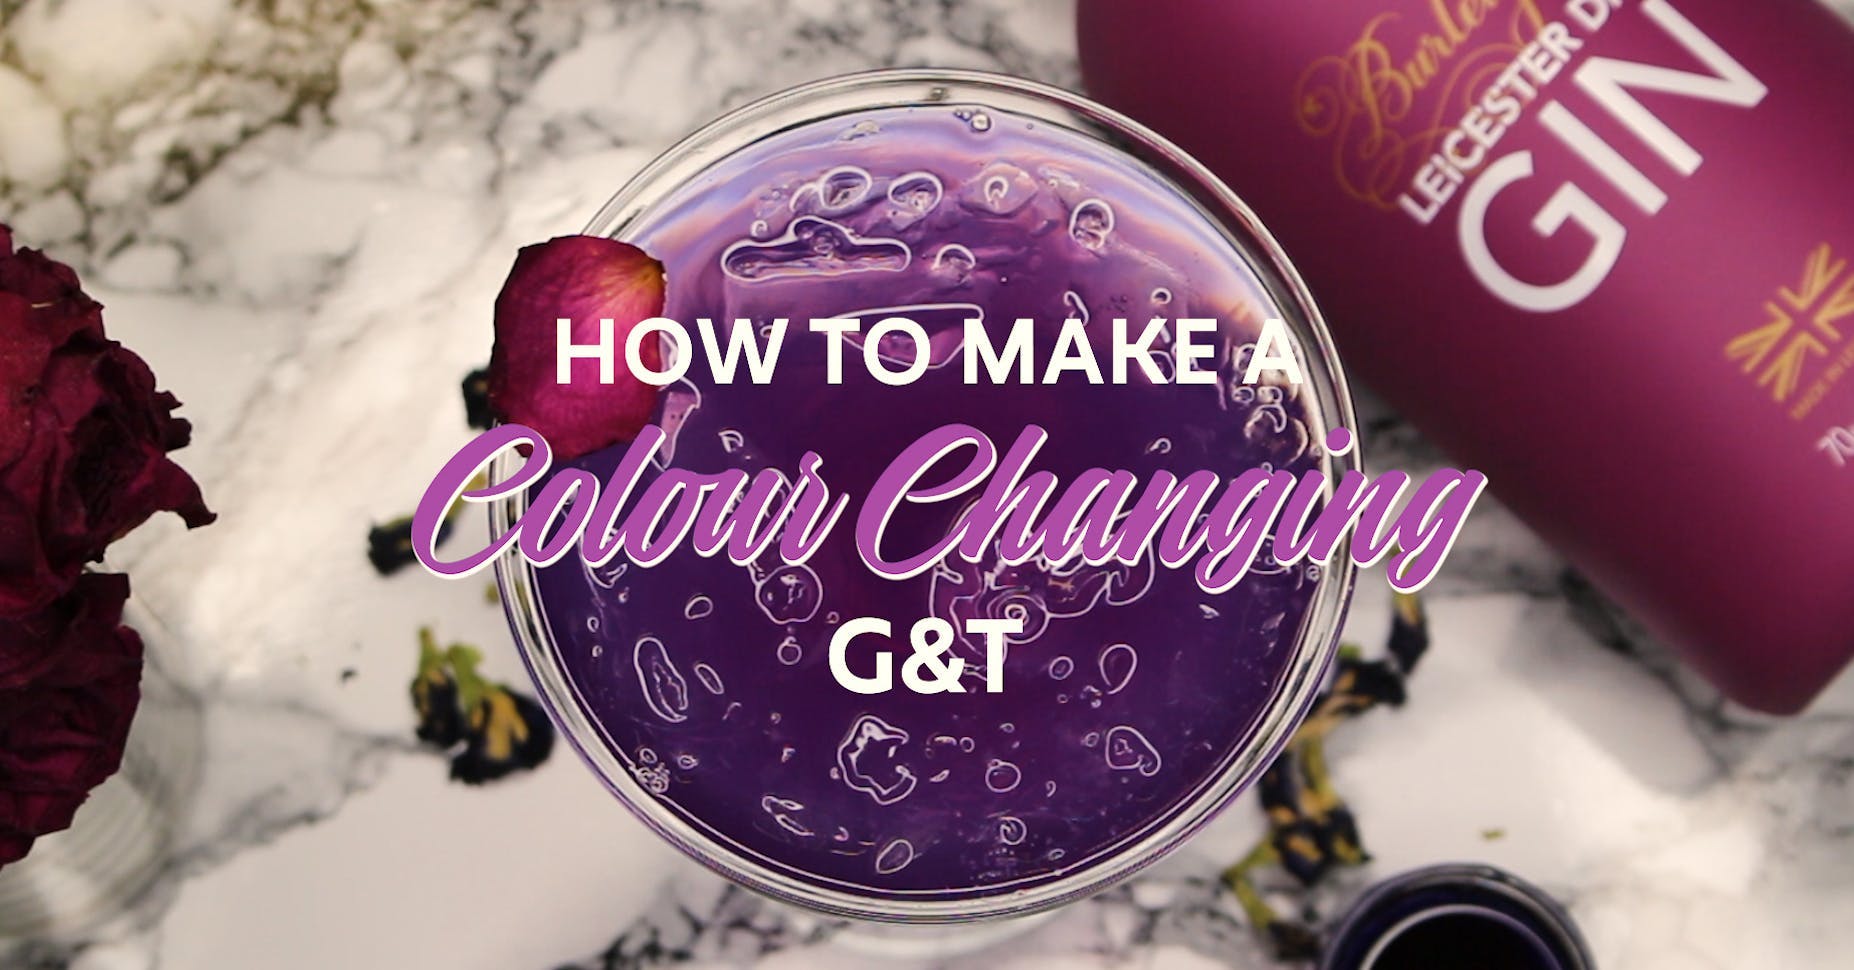 colour changing gin.jpg